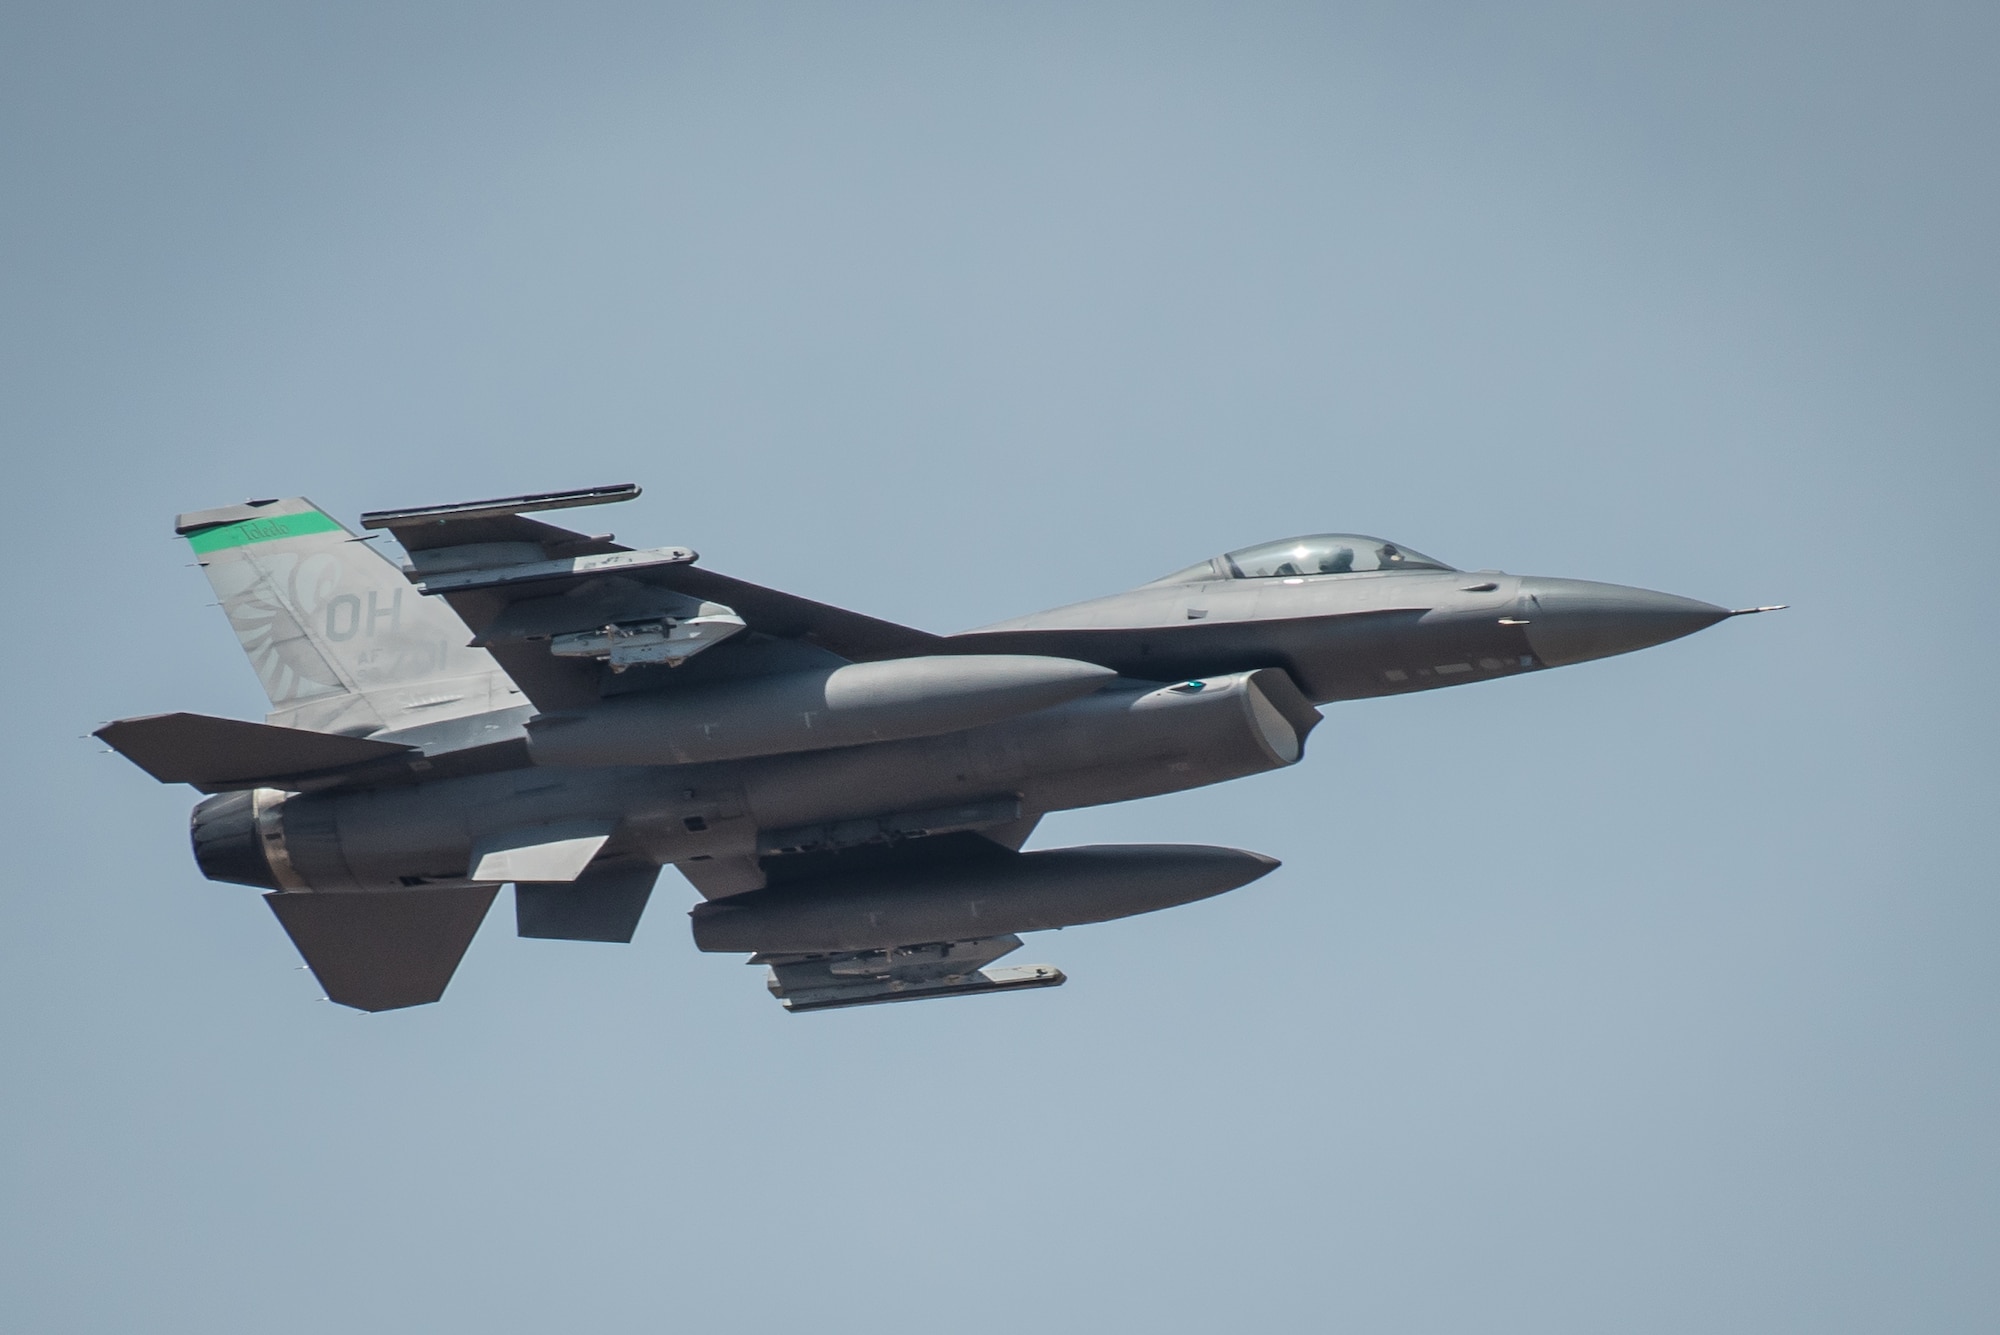 An F-16 Fighting Falcon from the Ohio Air National Guard’s 180th Fighter Wing performs an aerial demonstration over the Ohio River April 21, 2018, during the Thunder Over Louisville air show in Louisville, Ky. The Kentucky Air National Guard once again served as the base of operations for military aircraft participating in the show, providing essential maintenance and logistical support. (U.S. Air National Guard photo by Lt. Col. Dale Greer)